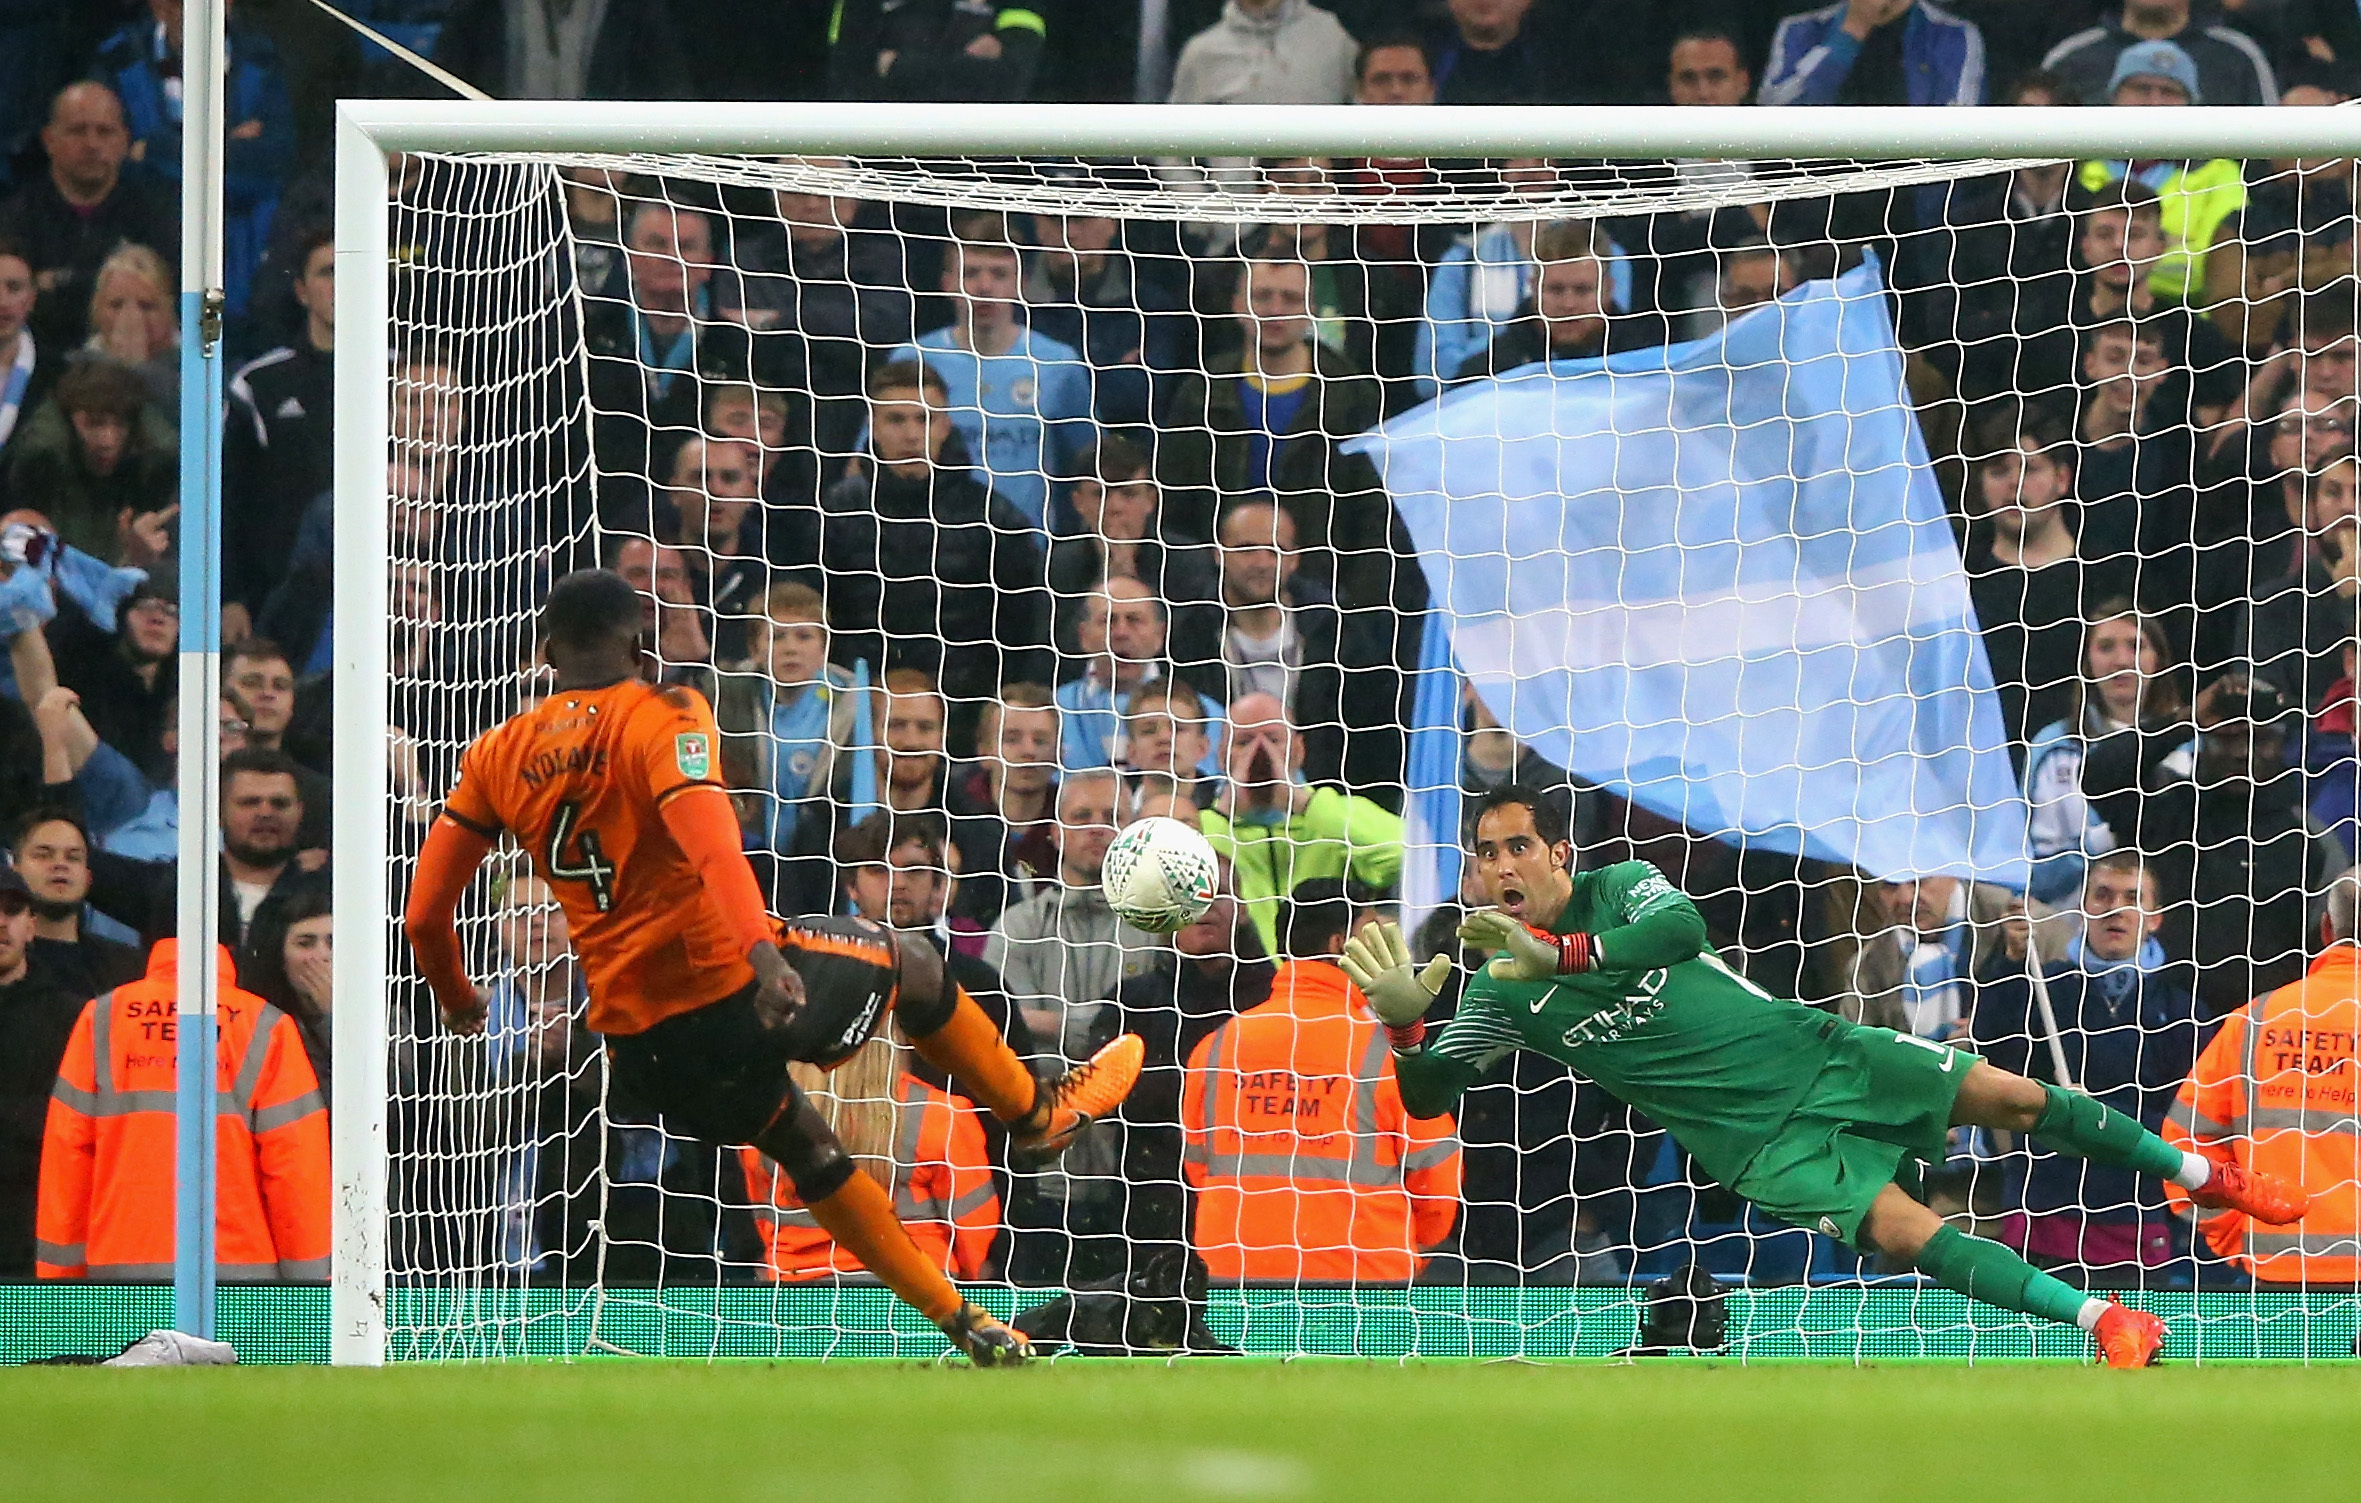 Claudio Bravo of Manchester City saves penalty during the Carabao Cup Fourth Round match between Manchester City and Wolverhampton Wanderers (Alex Livesey/Getty Images)